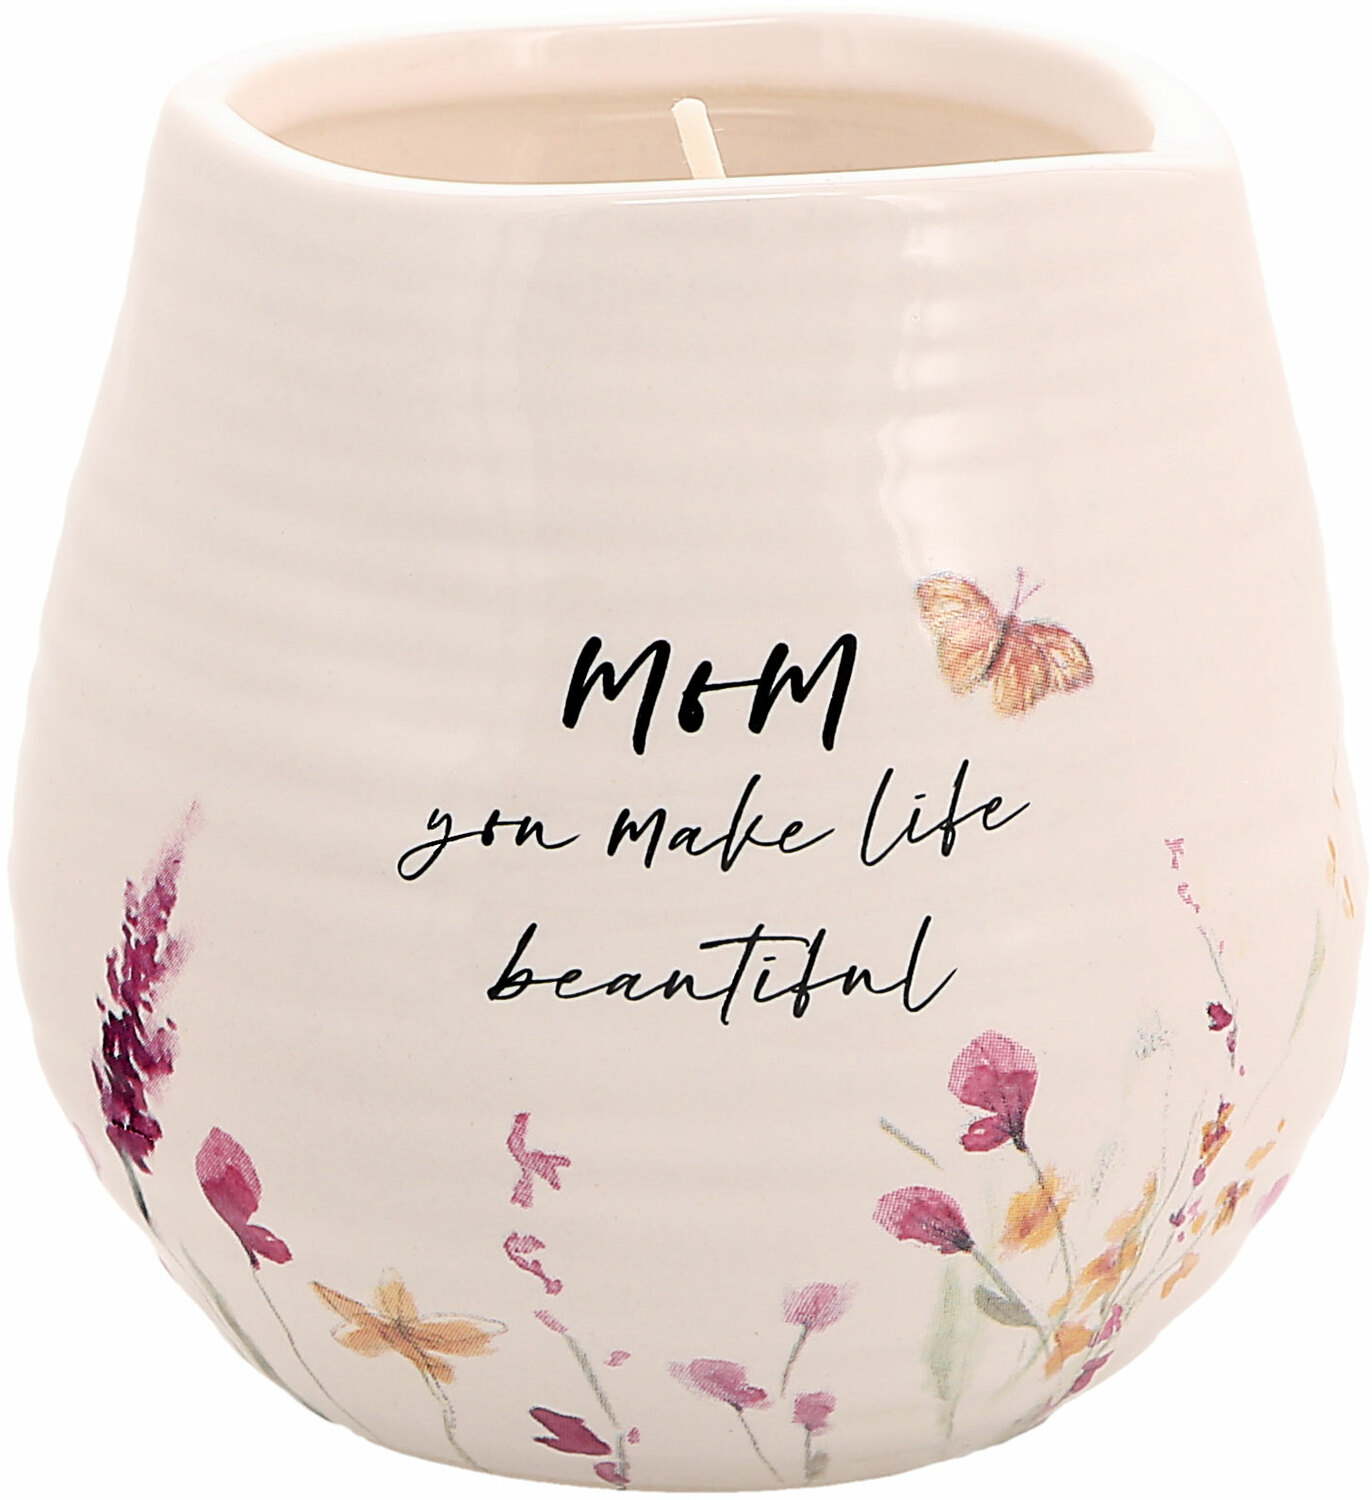 Mom by Meadows of Joy - Mom - 8 oz - 100% Soy Wax Candle
Scent: Tranquility